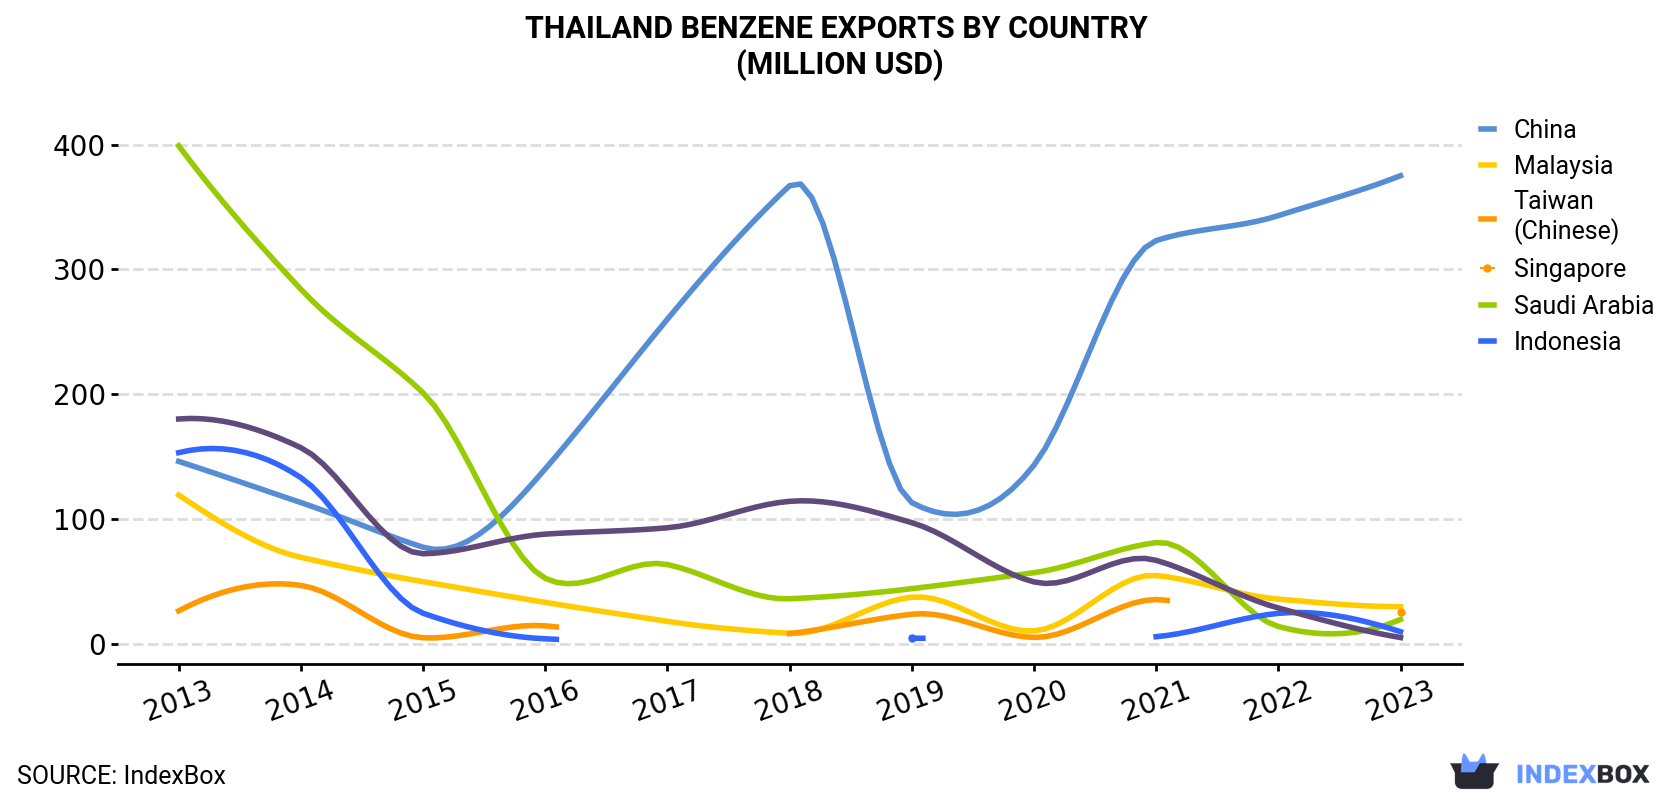 Thailand Benzene Exports By Country (Million USD)